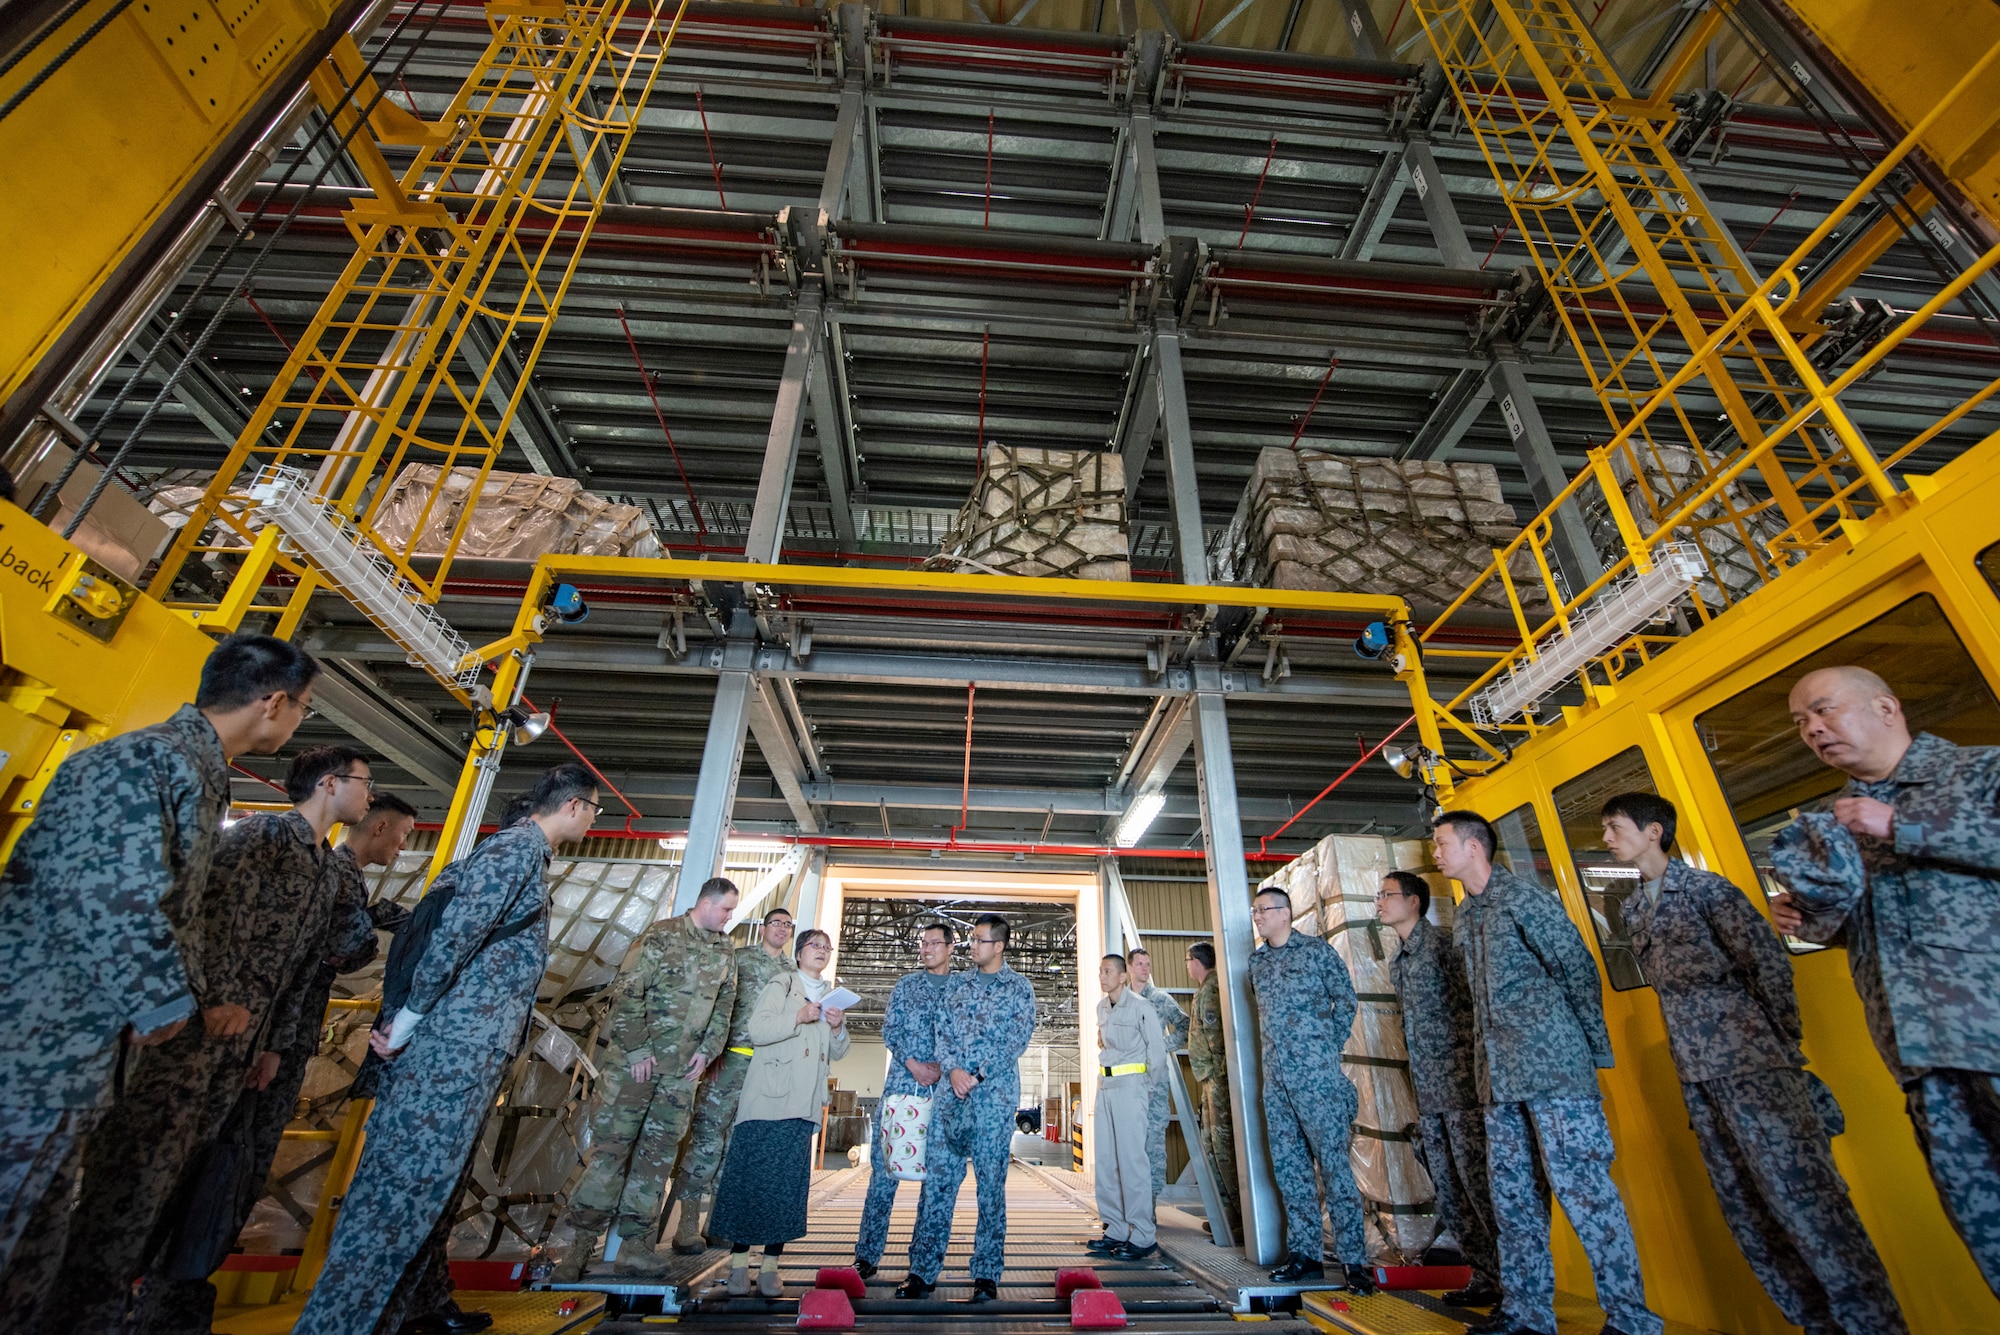 Tech.Sgt. Austin Kelley, 730th Air Mobility Squadron air freight shift supervisor, explains the capabilities of a Mechanized Material Handling System to Japanese Air Self-Defense Force Lieutenants during a basic maintenance officer tour at Yokota Air Base, Japan, Nov. 21, 2019.